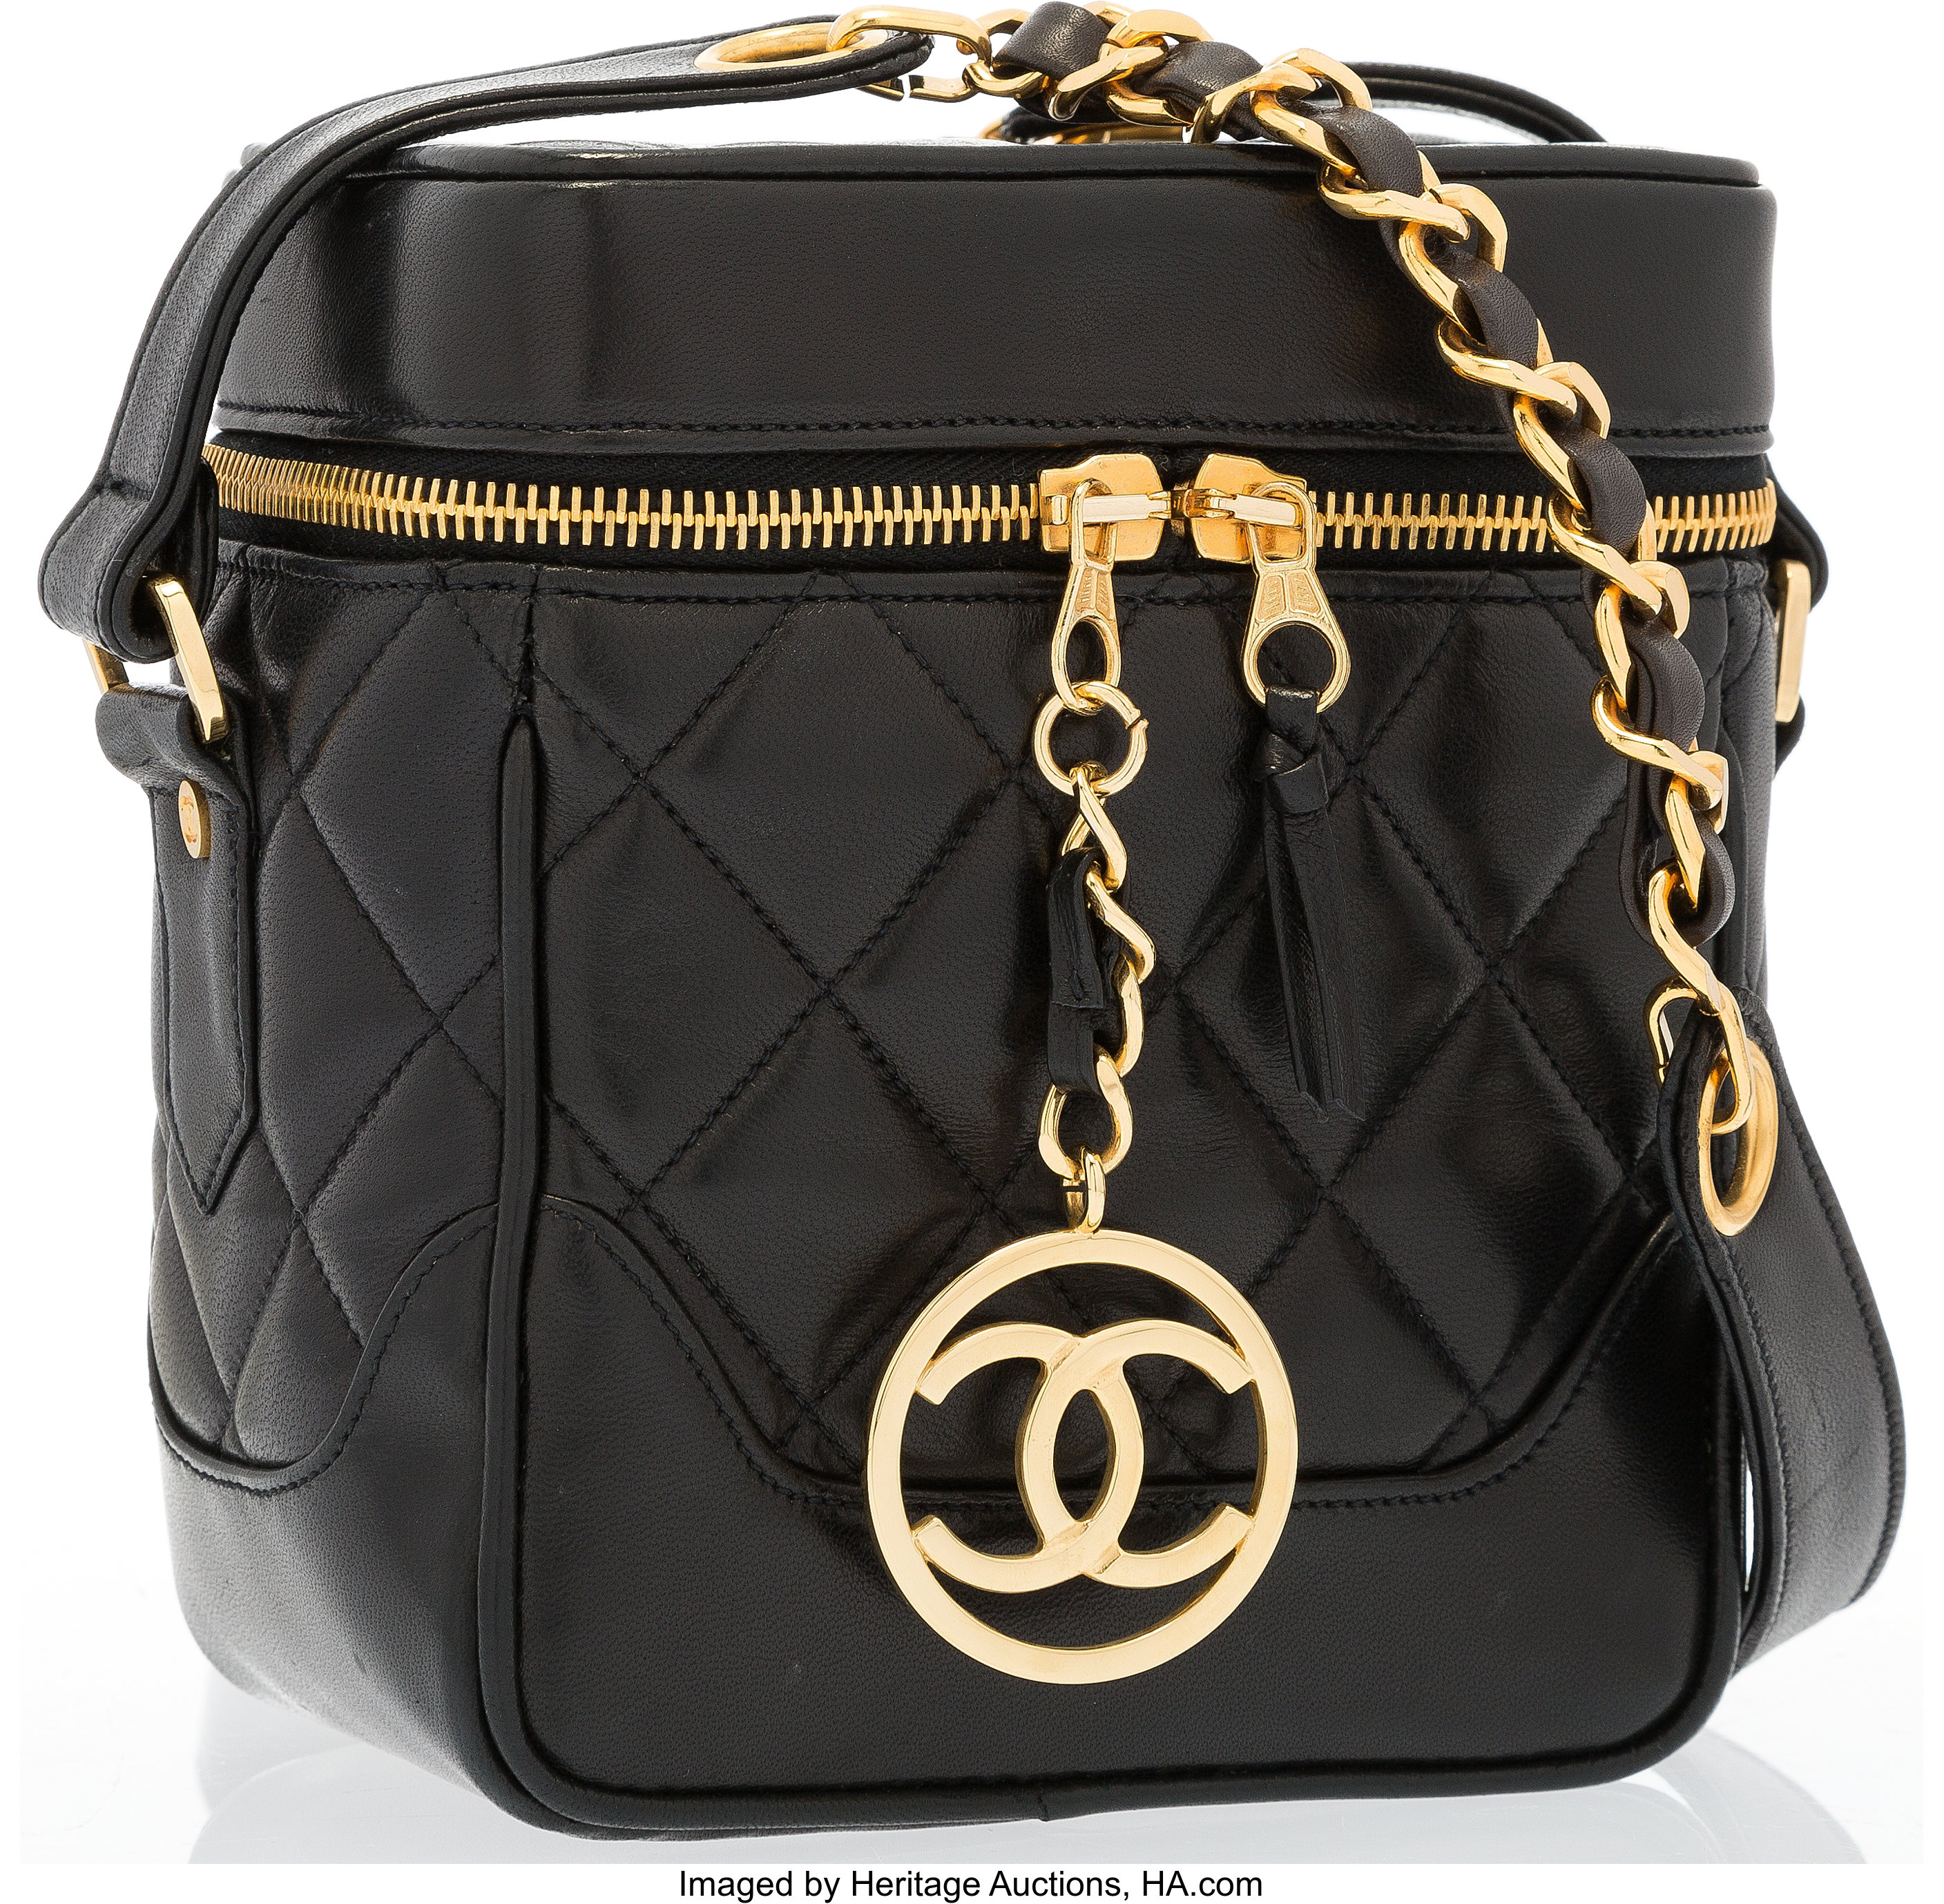 At Auction: Chanel black quilted lambskin front pocket handbag